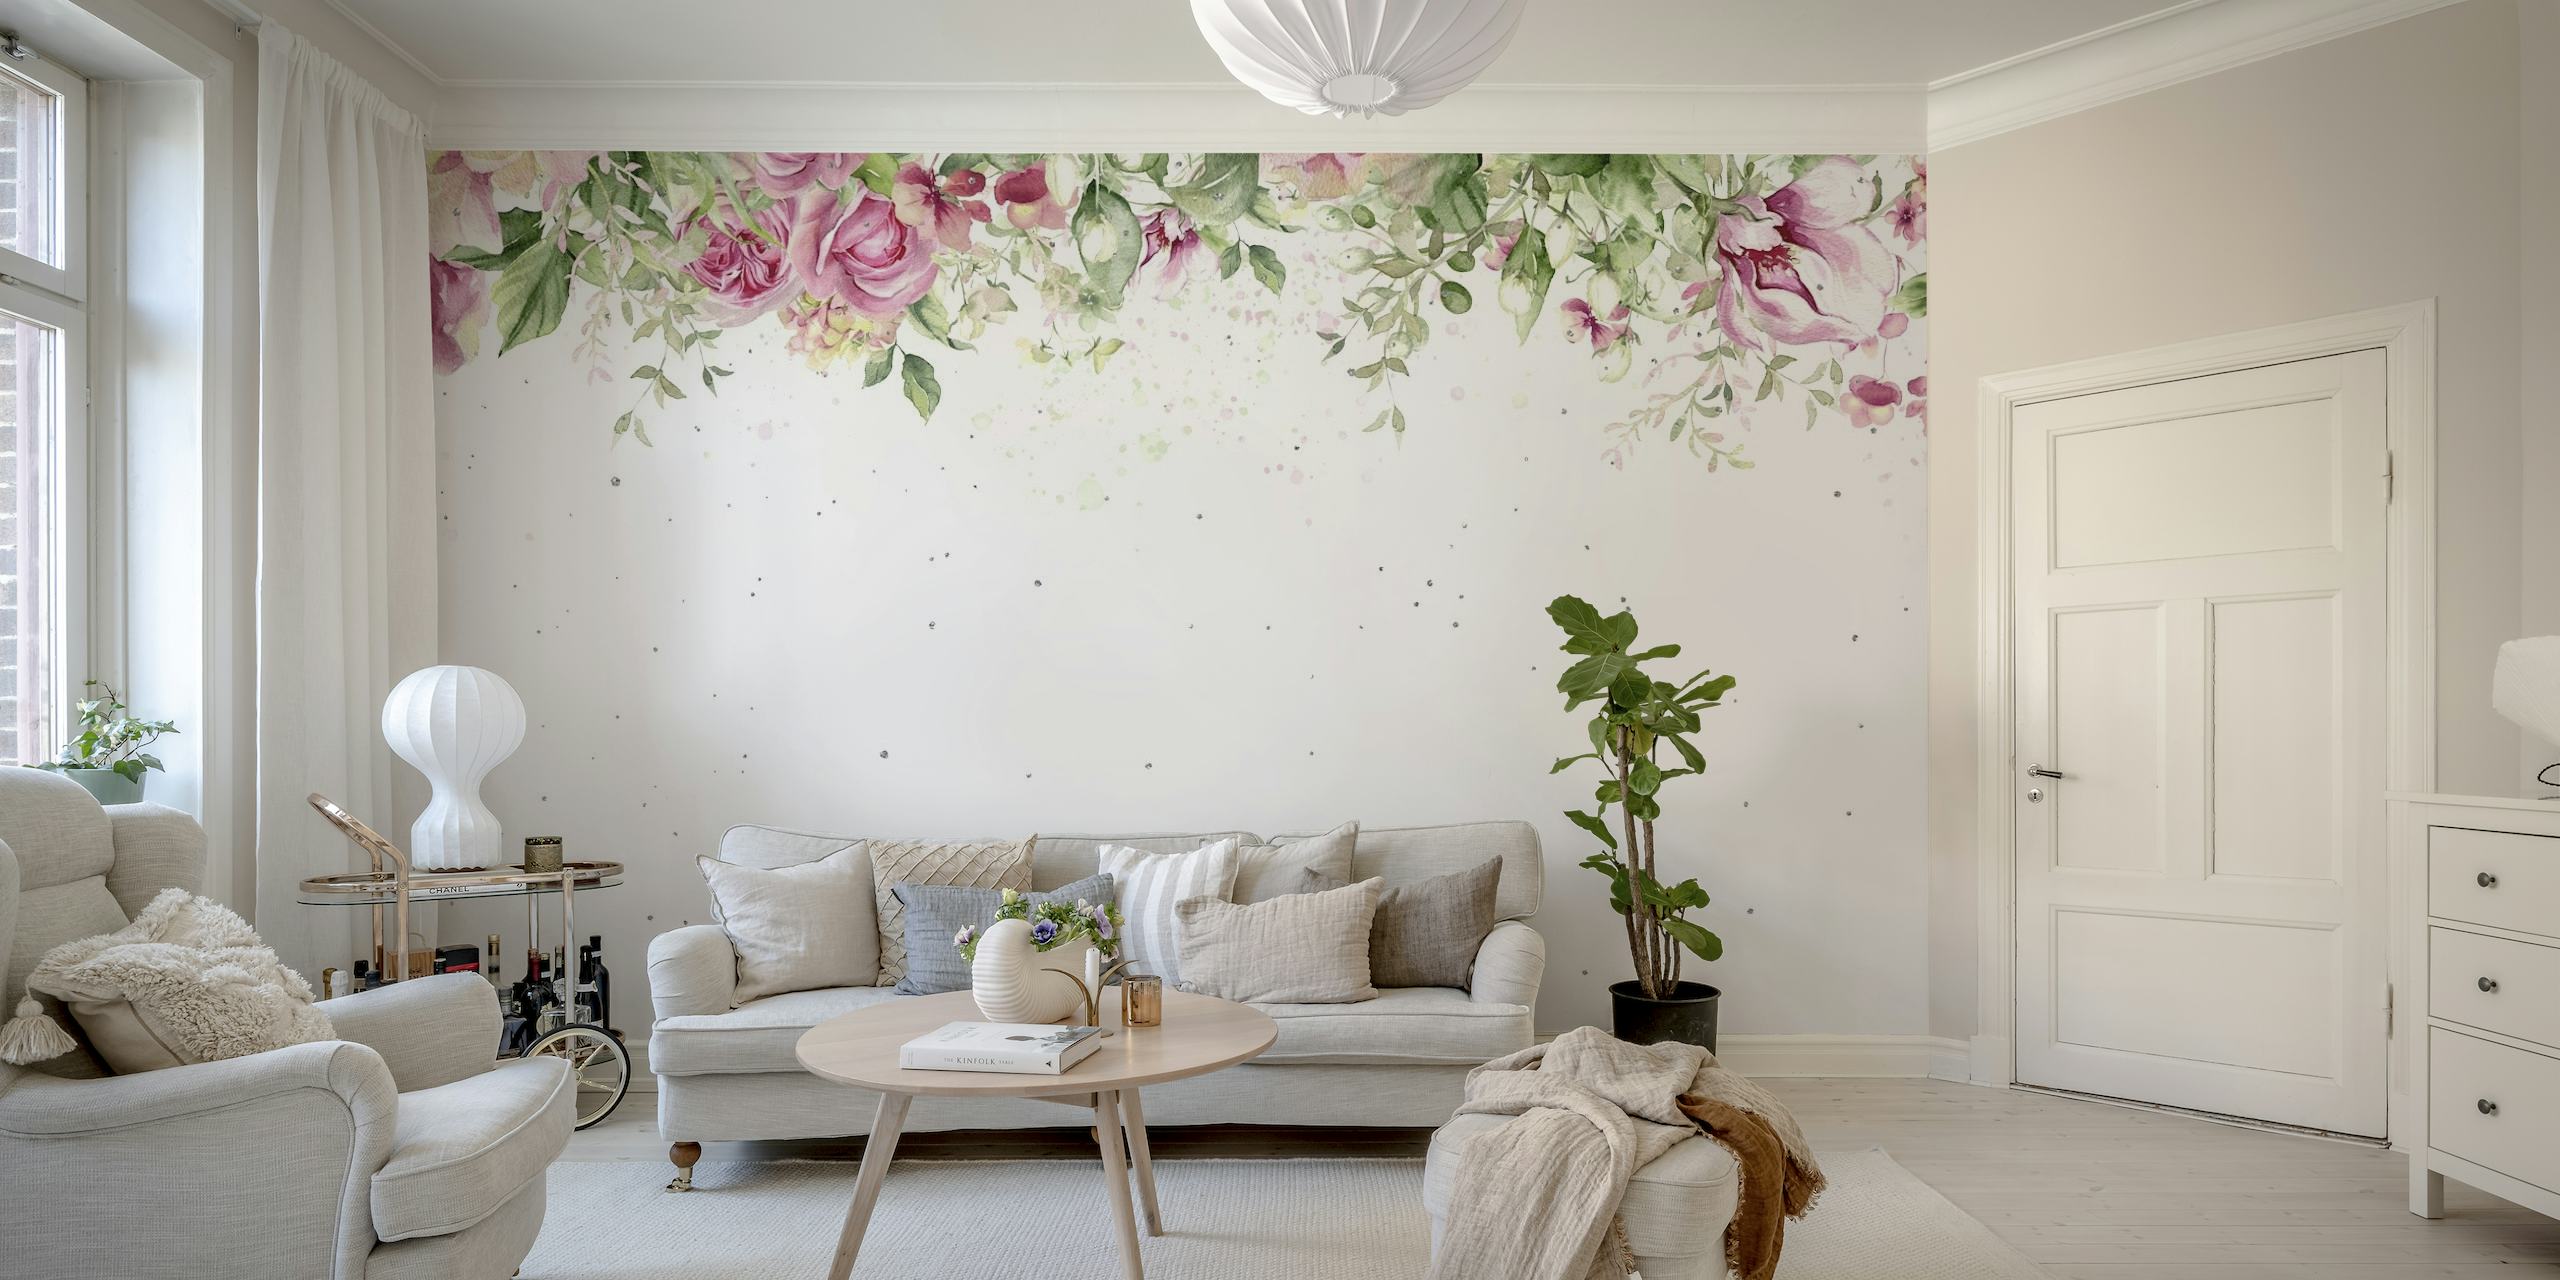 Elegant watercolor roses and greenery creating a tranquil top border on a wall mural